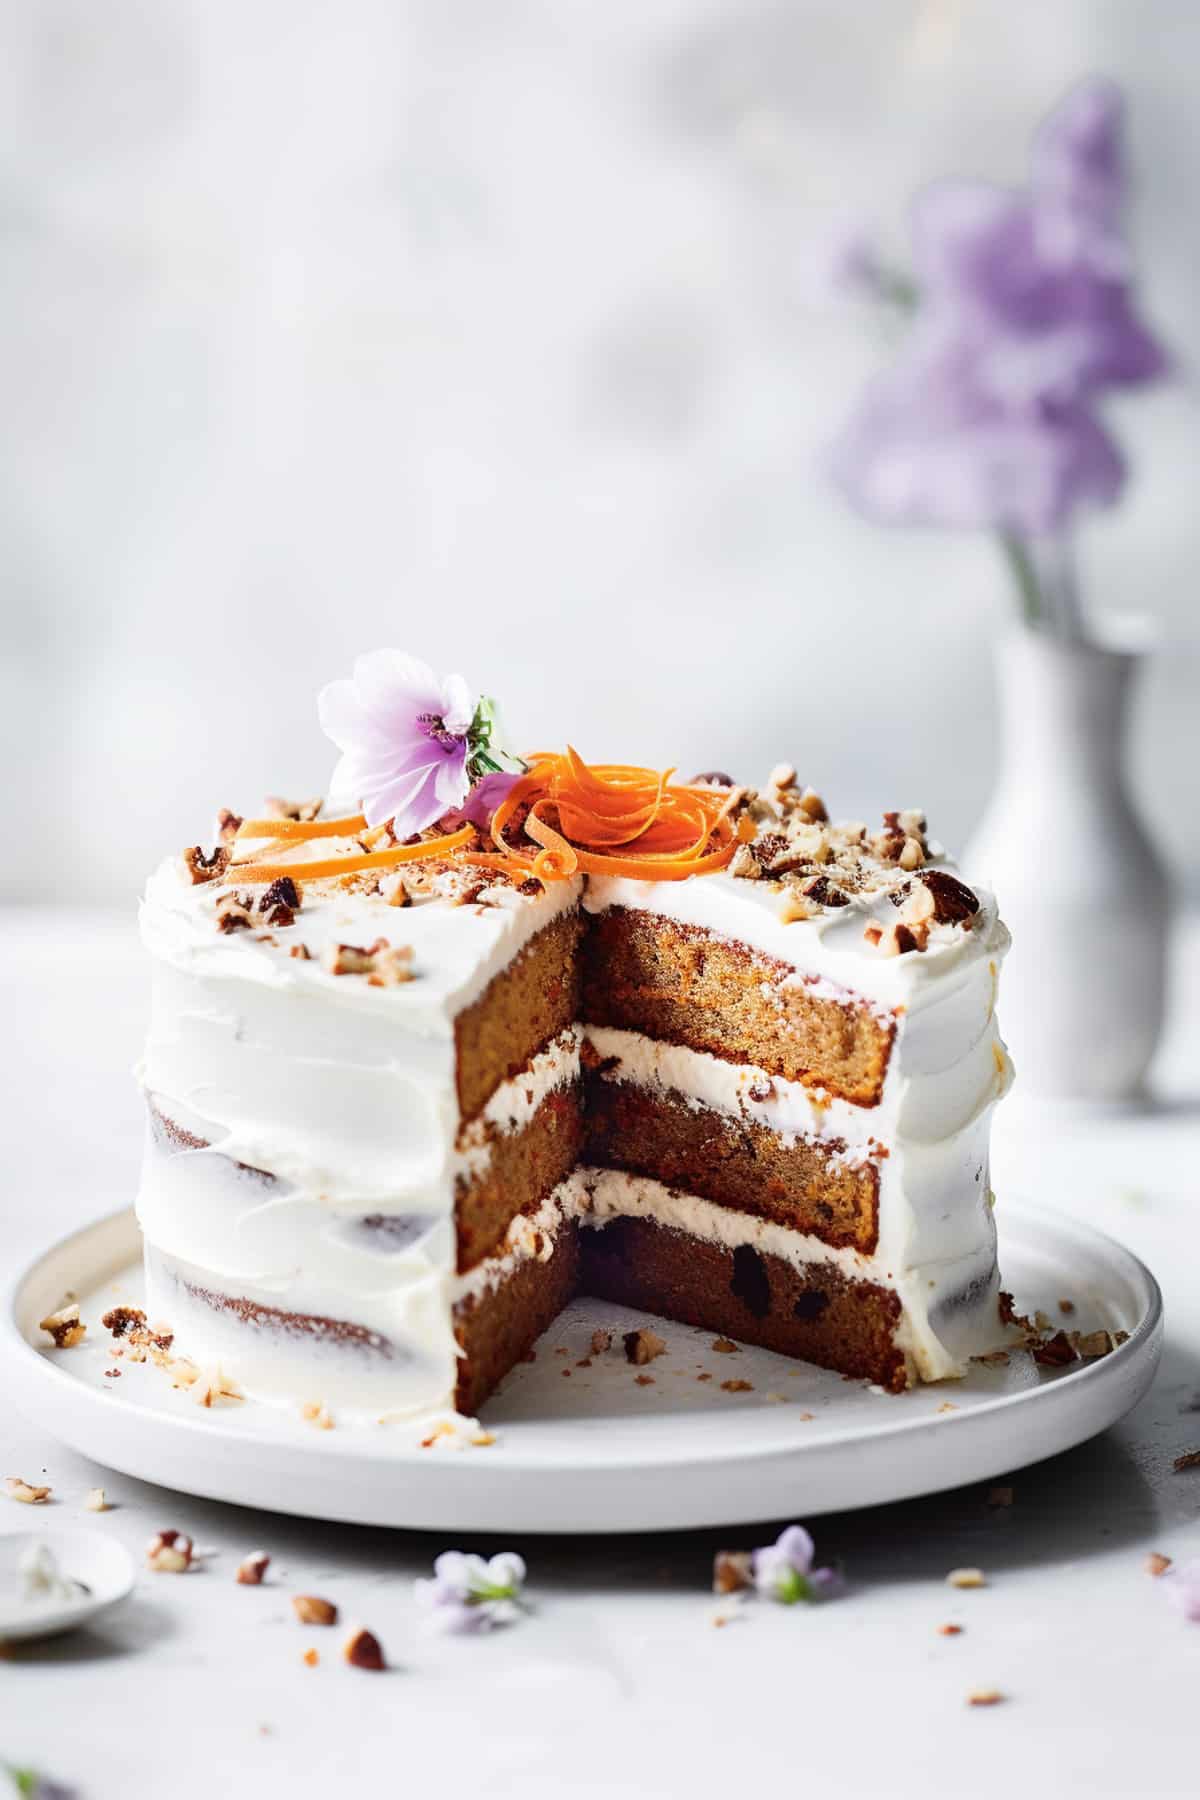 A carrot cake with cream cheese frosting on a white plate.